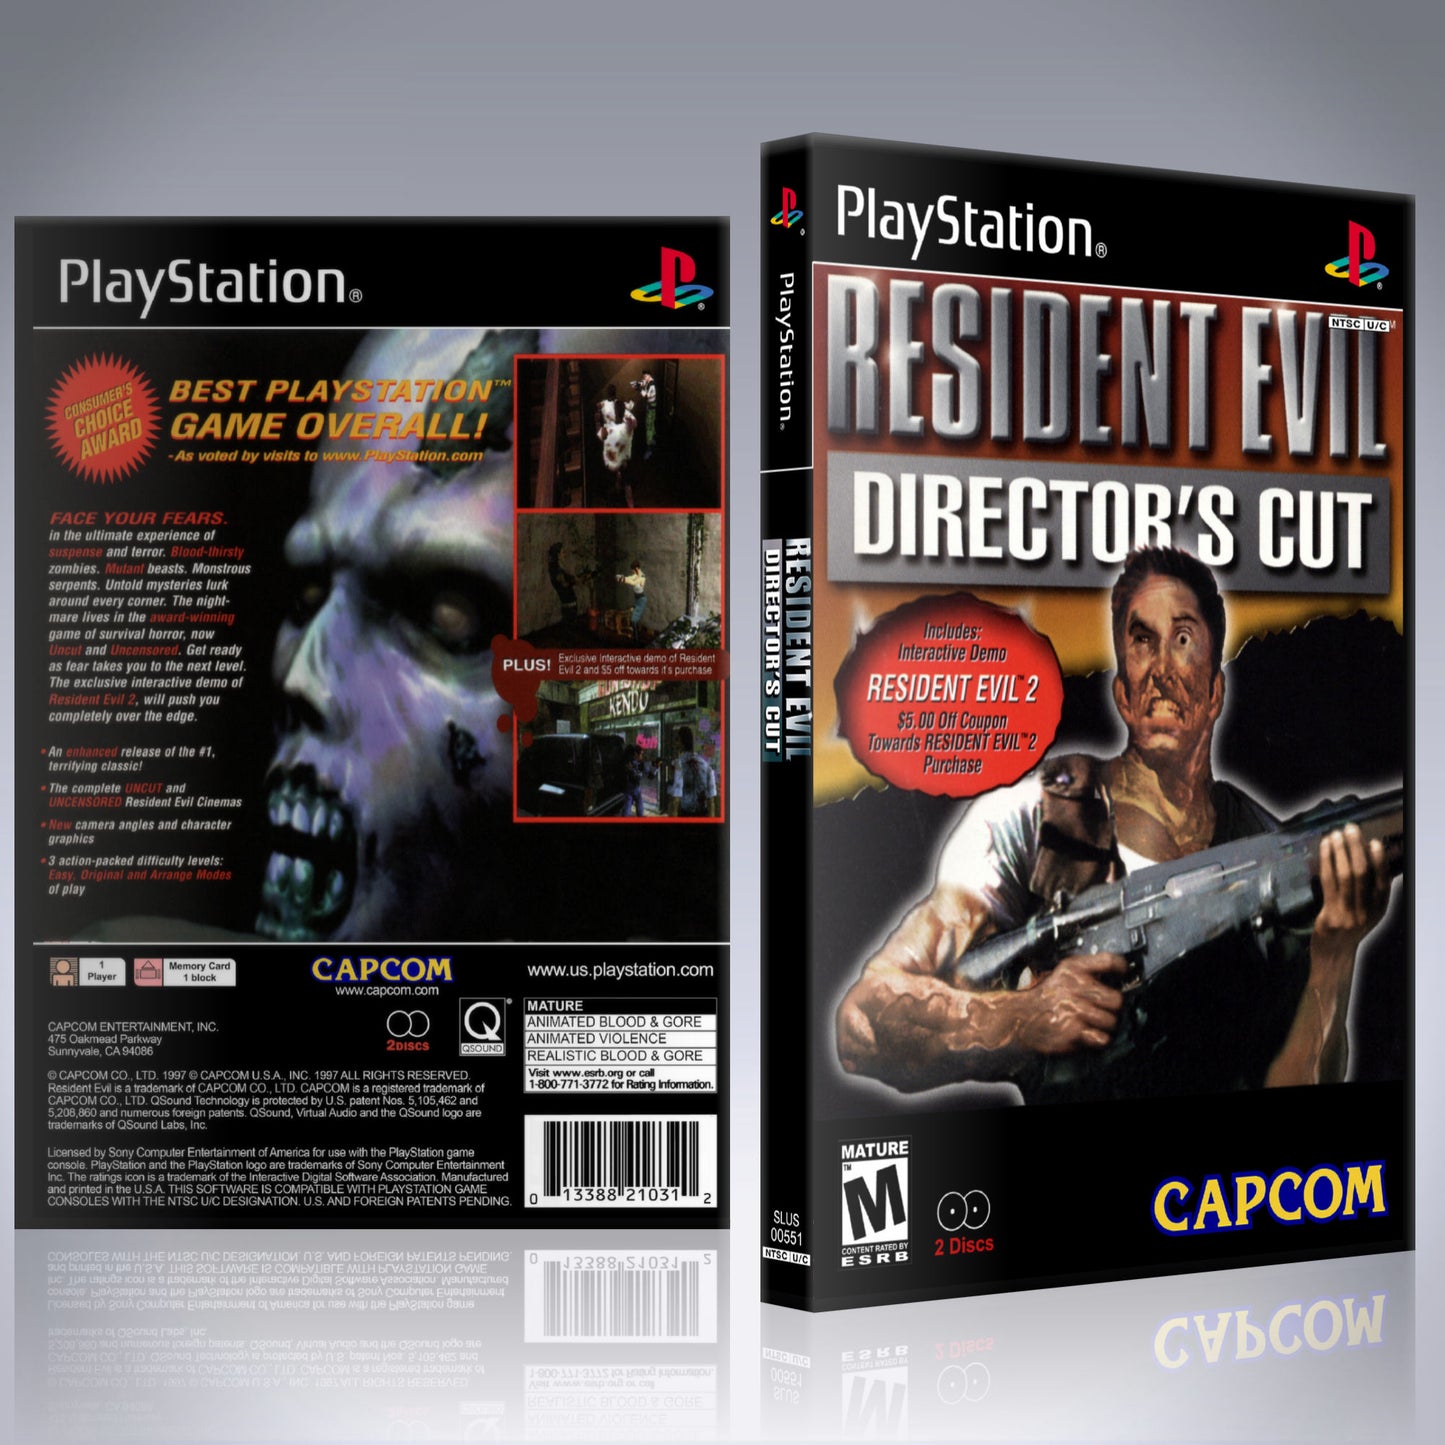 PS1 Case - NO GAME - Resident Evil - Director's Cut [2 Disc]